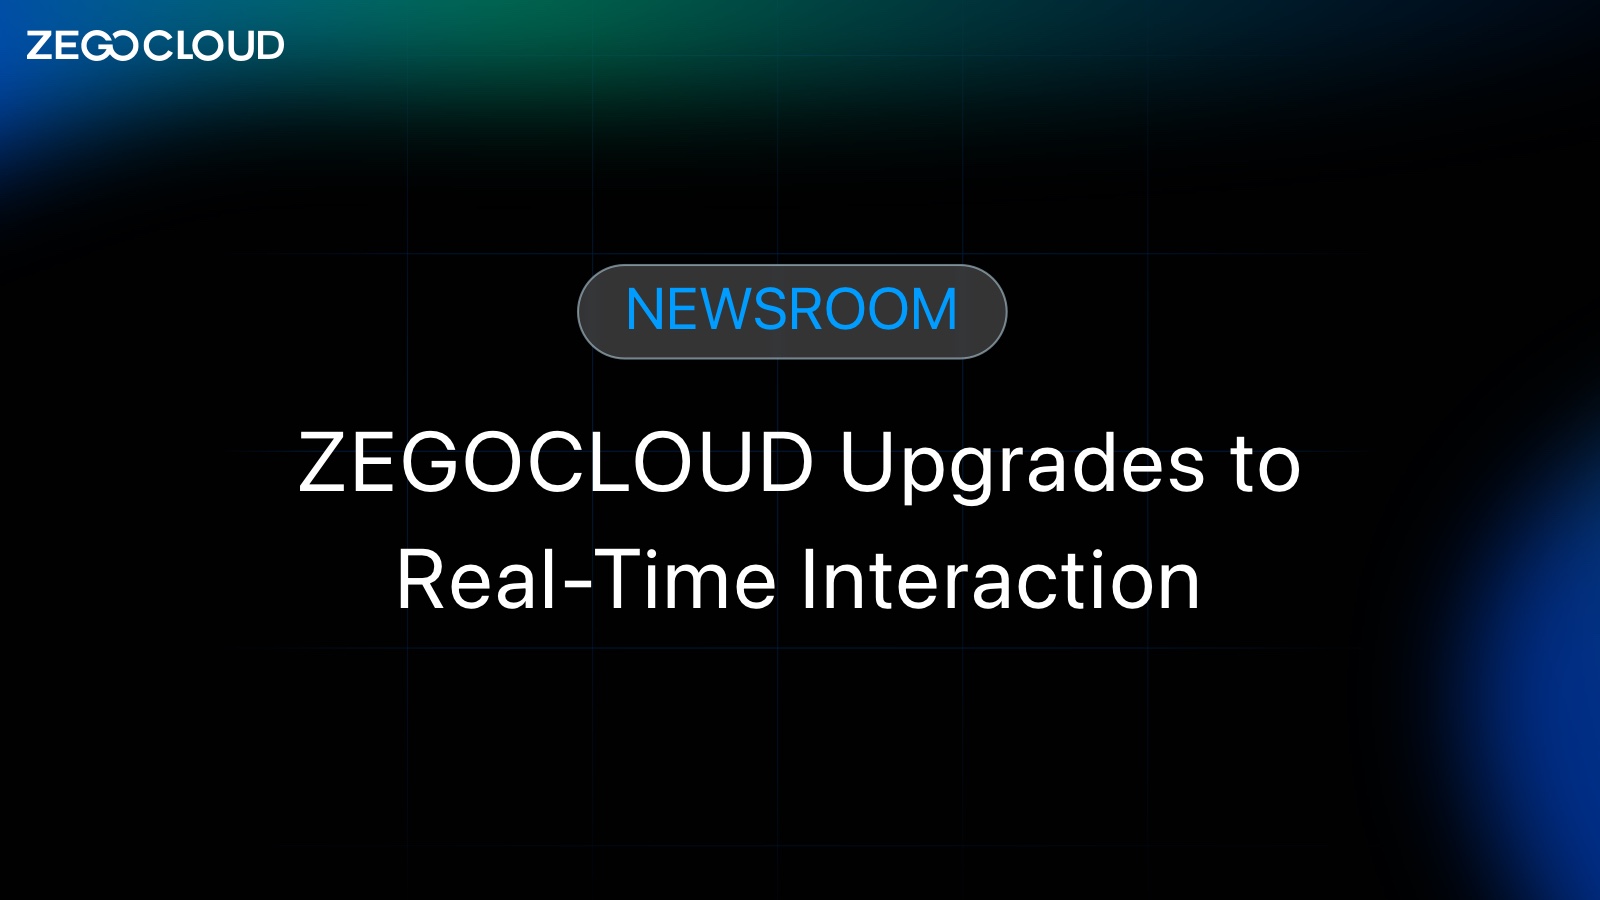 <strong>ZEGOCLOUD Upgrades to Real-Time Interaction</strong>